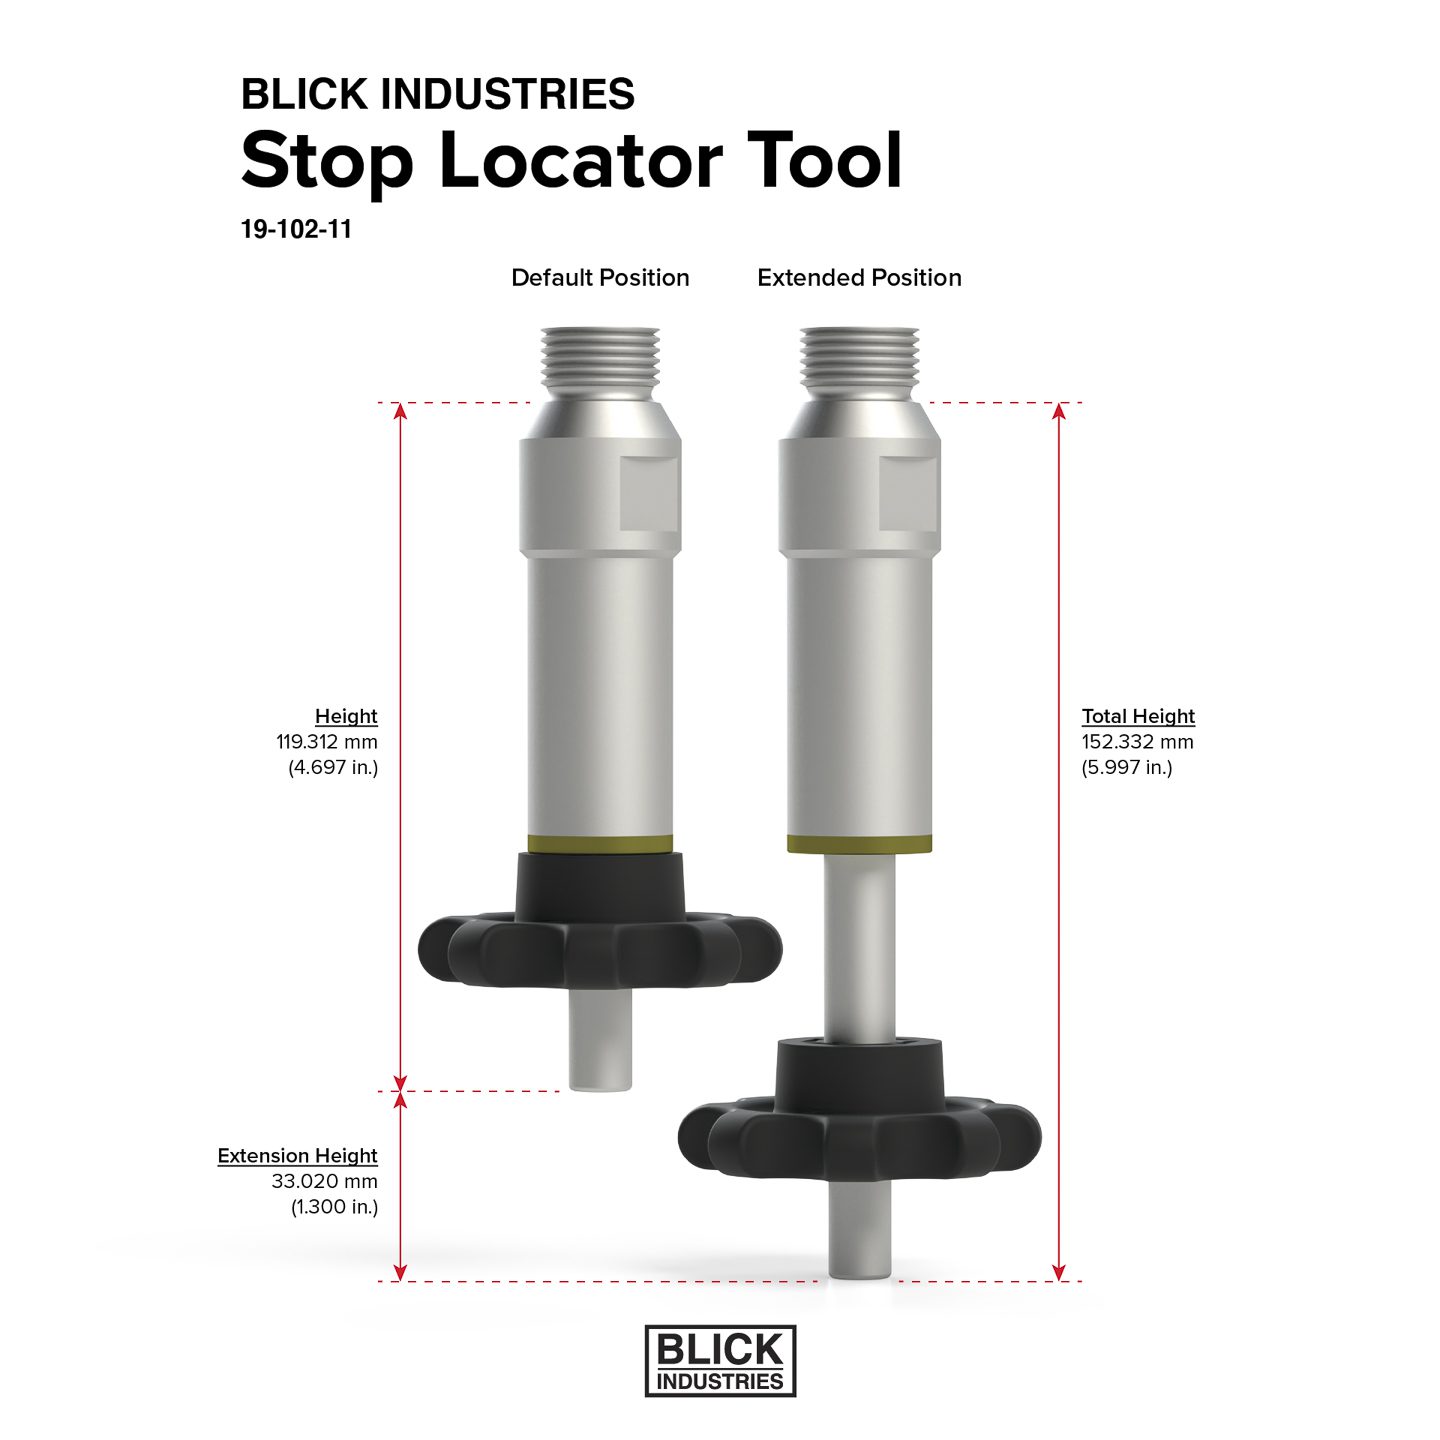 Stop Locator Tool by Blick Industries